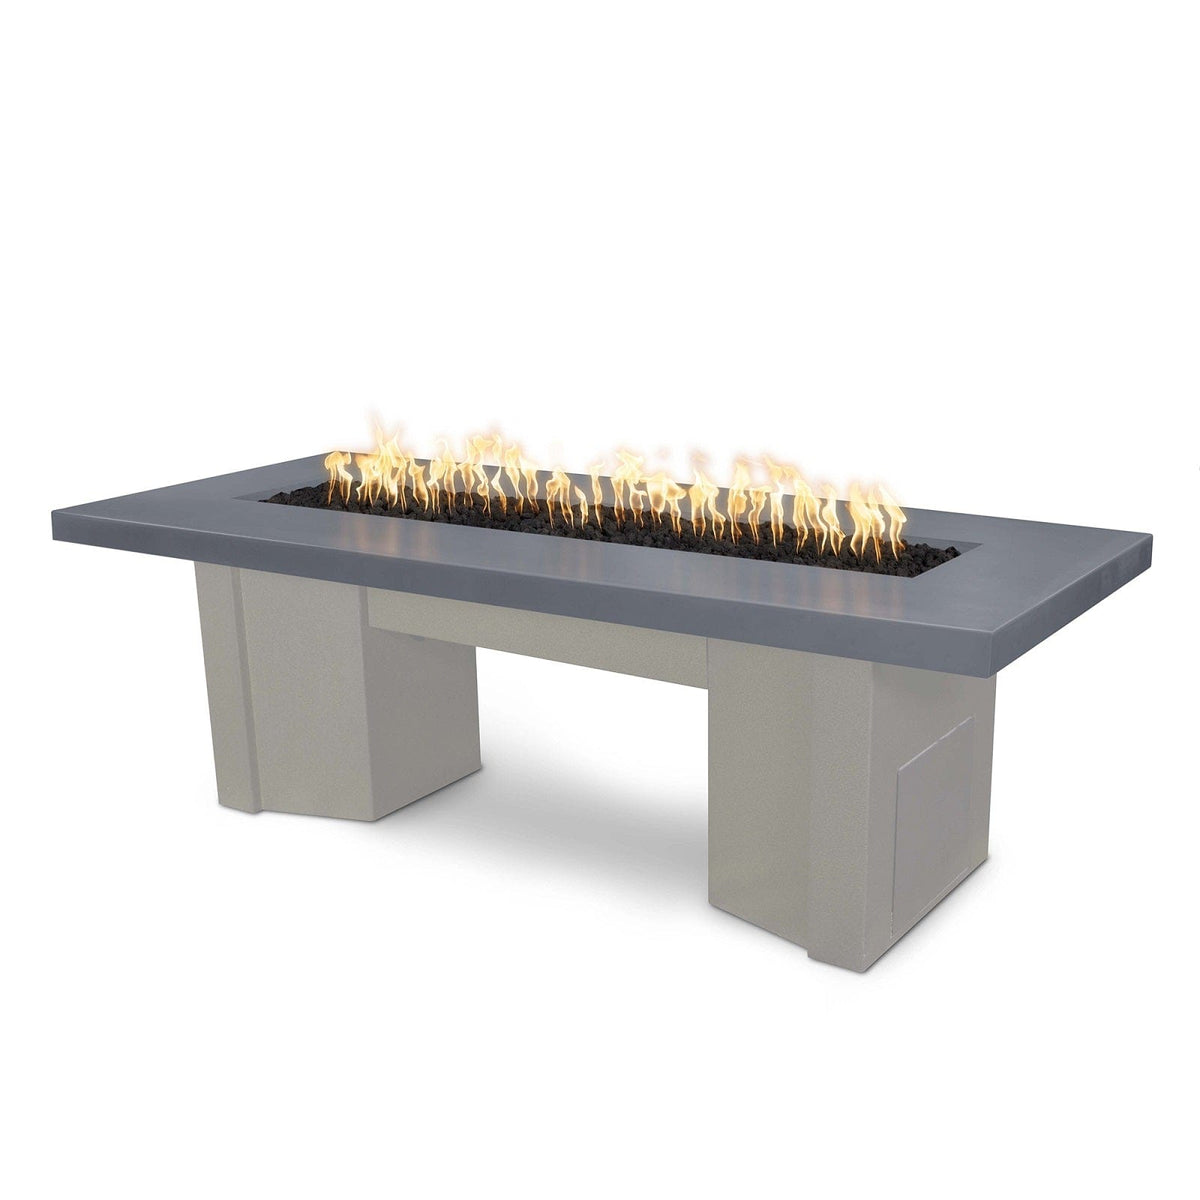 The Outdoor Plus Fire Features Gray (-GRY) / Pewter Powder Coated Steel (-PEW) The Outdoor Plus 60&quot; Alameda Fire Table Smooth Concrete in Natural Gas - Flame Sense System with Push Button Spark Igniter / OPT-ALMGFRC60FSEN-NG